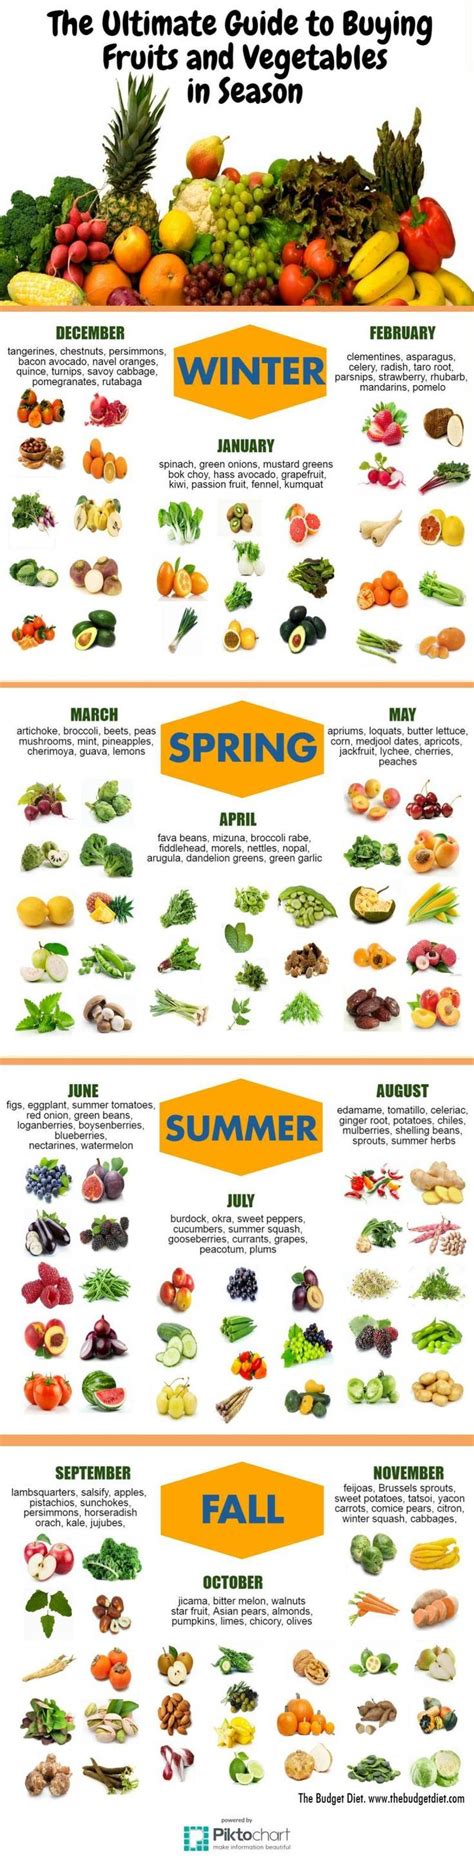 The Ultimate Guide To Buying Fruits And Vegetables In Season Food